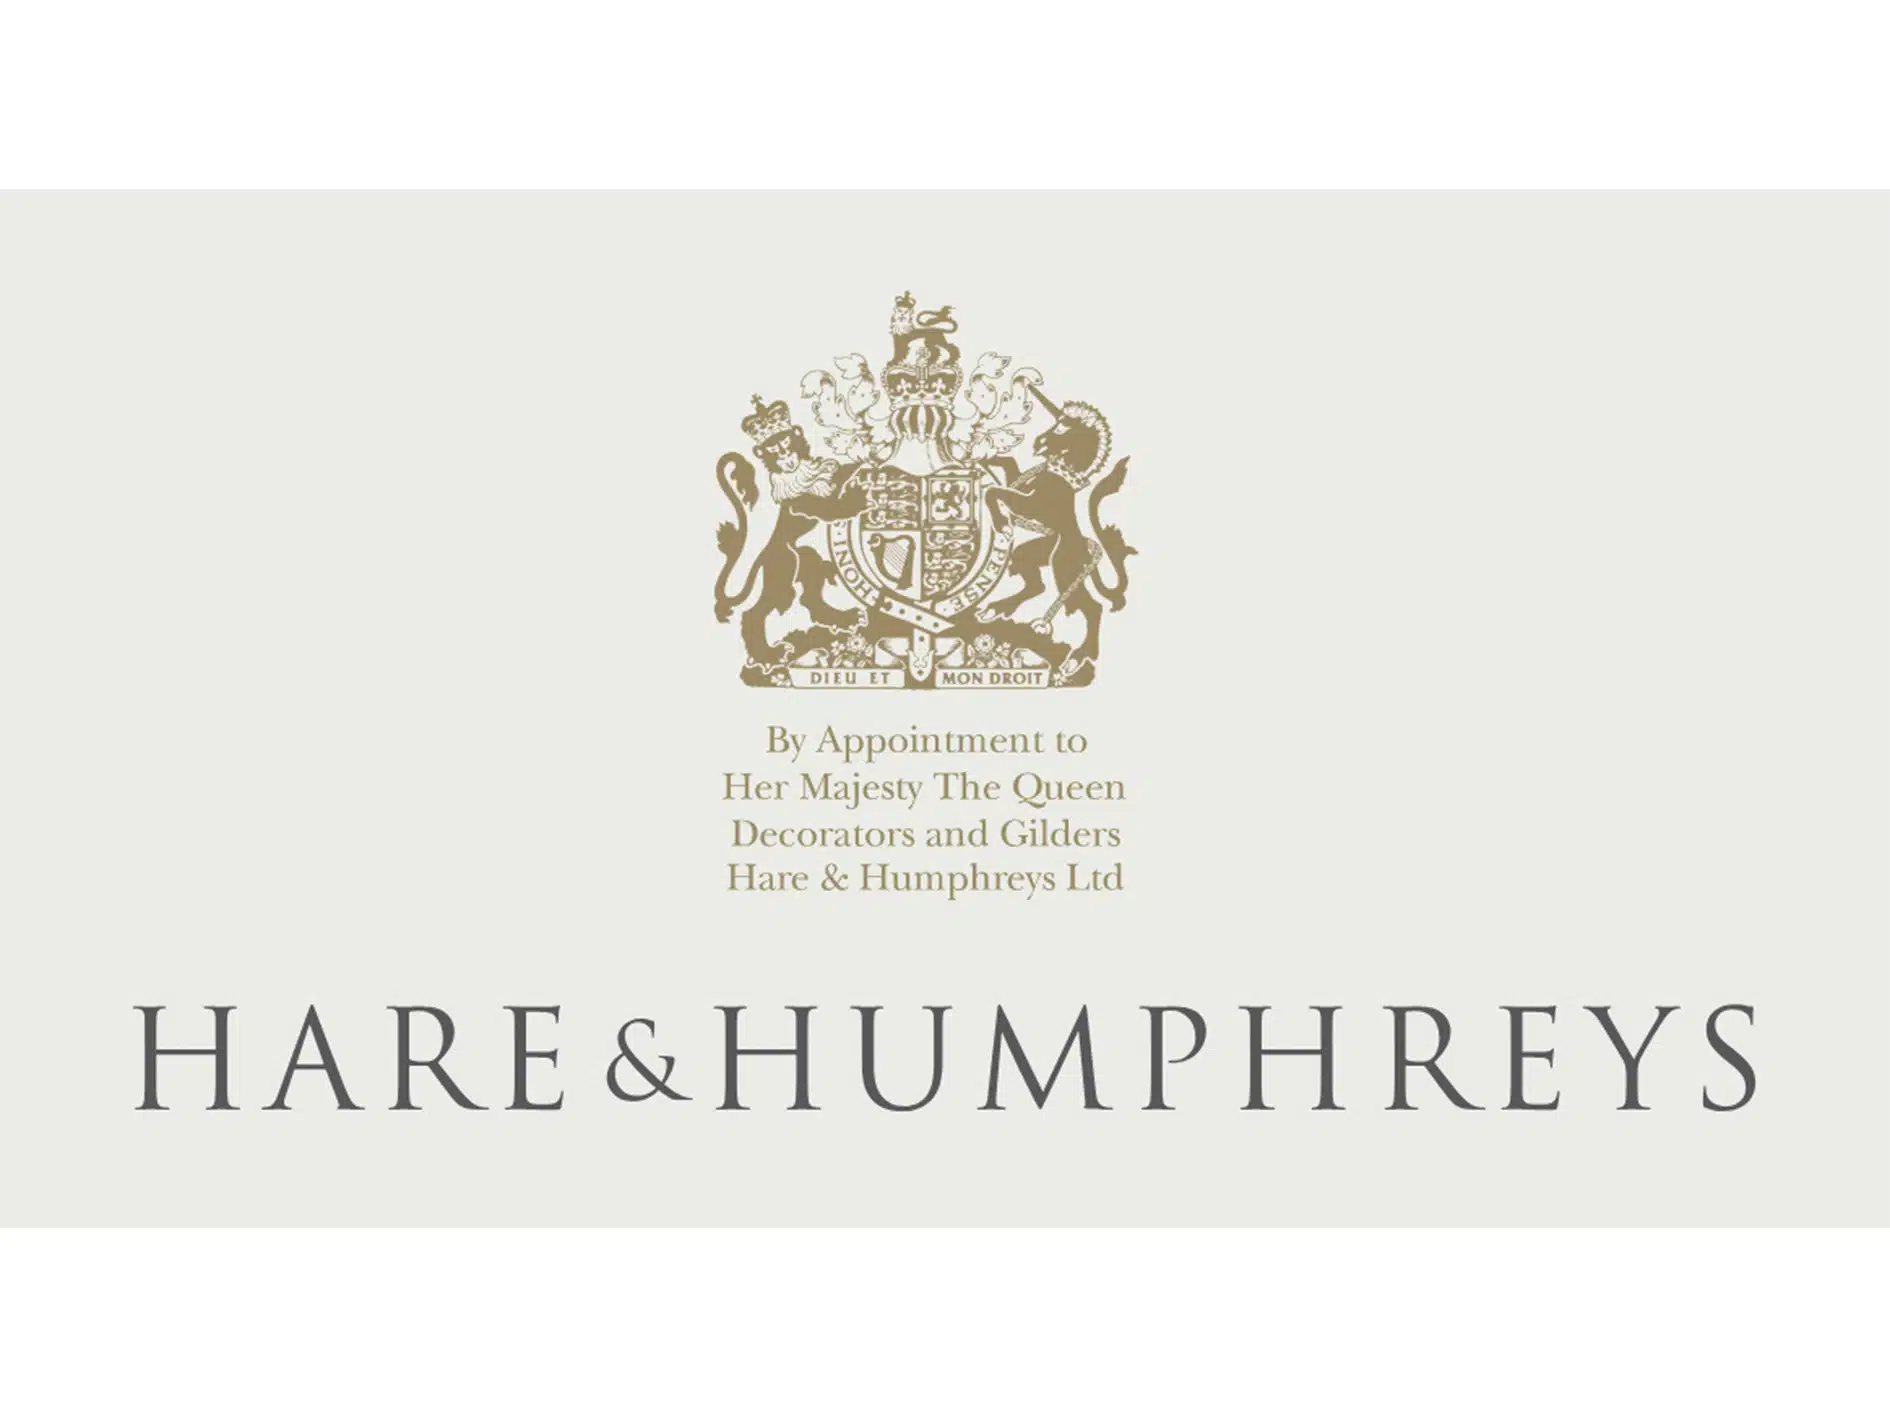 hare & humphreys are royal warrant holders and is katharine pooley go to for interior design